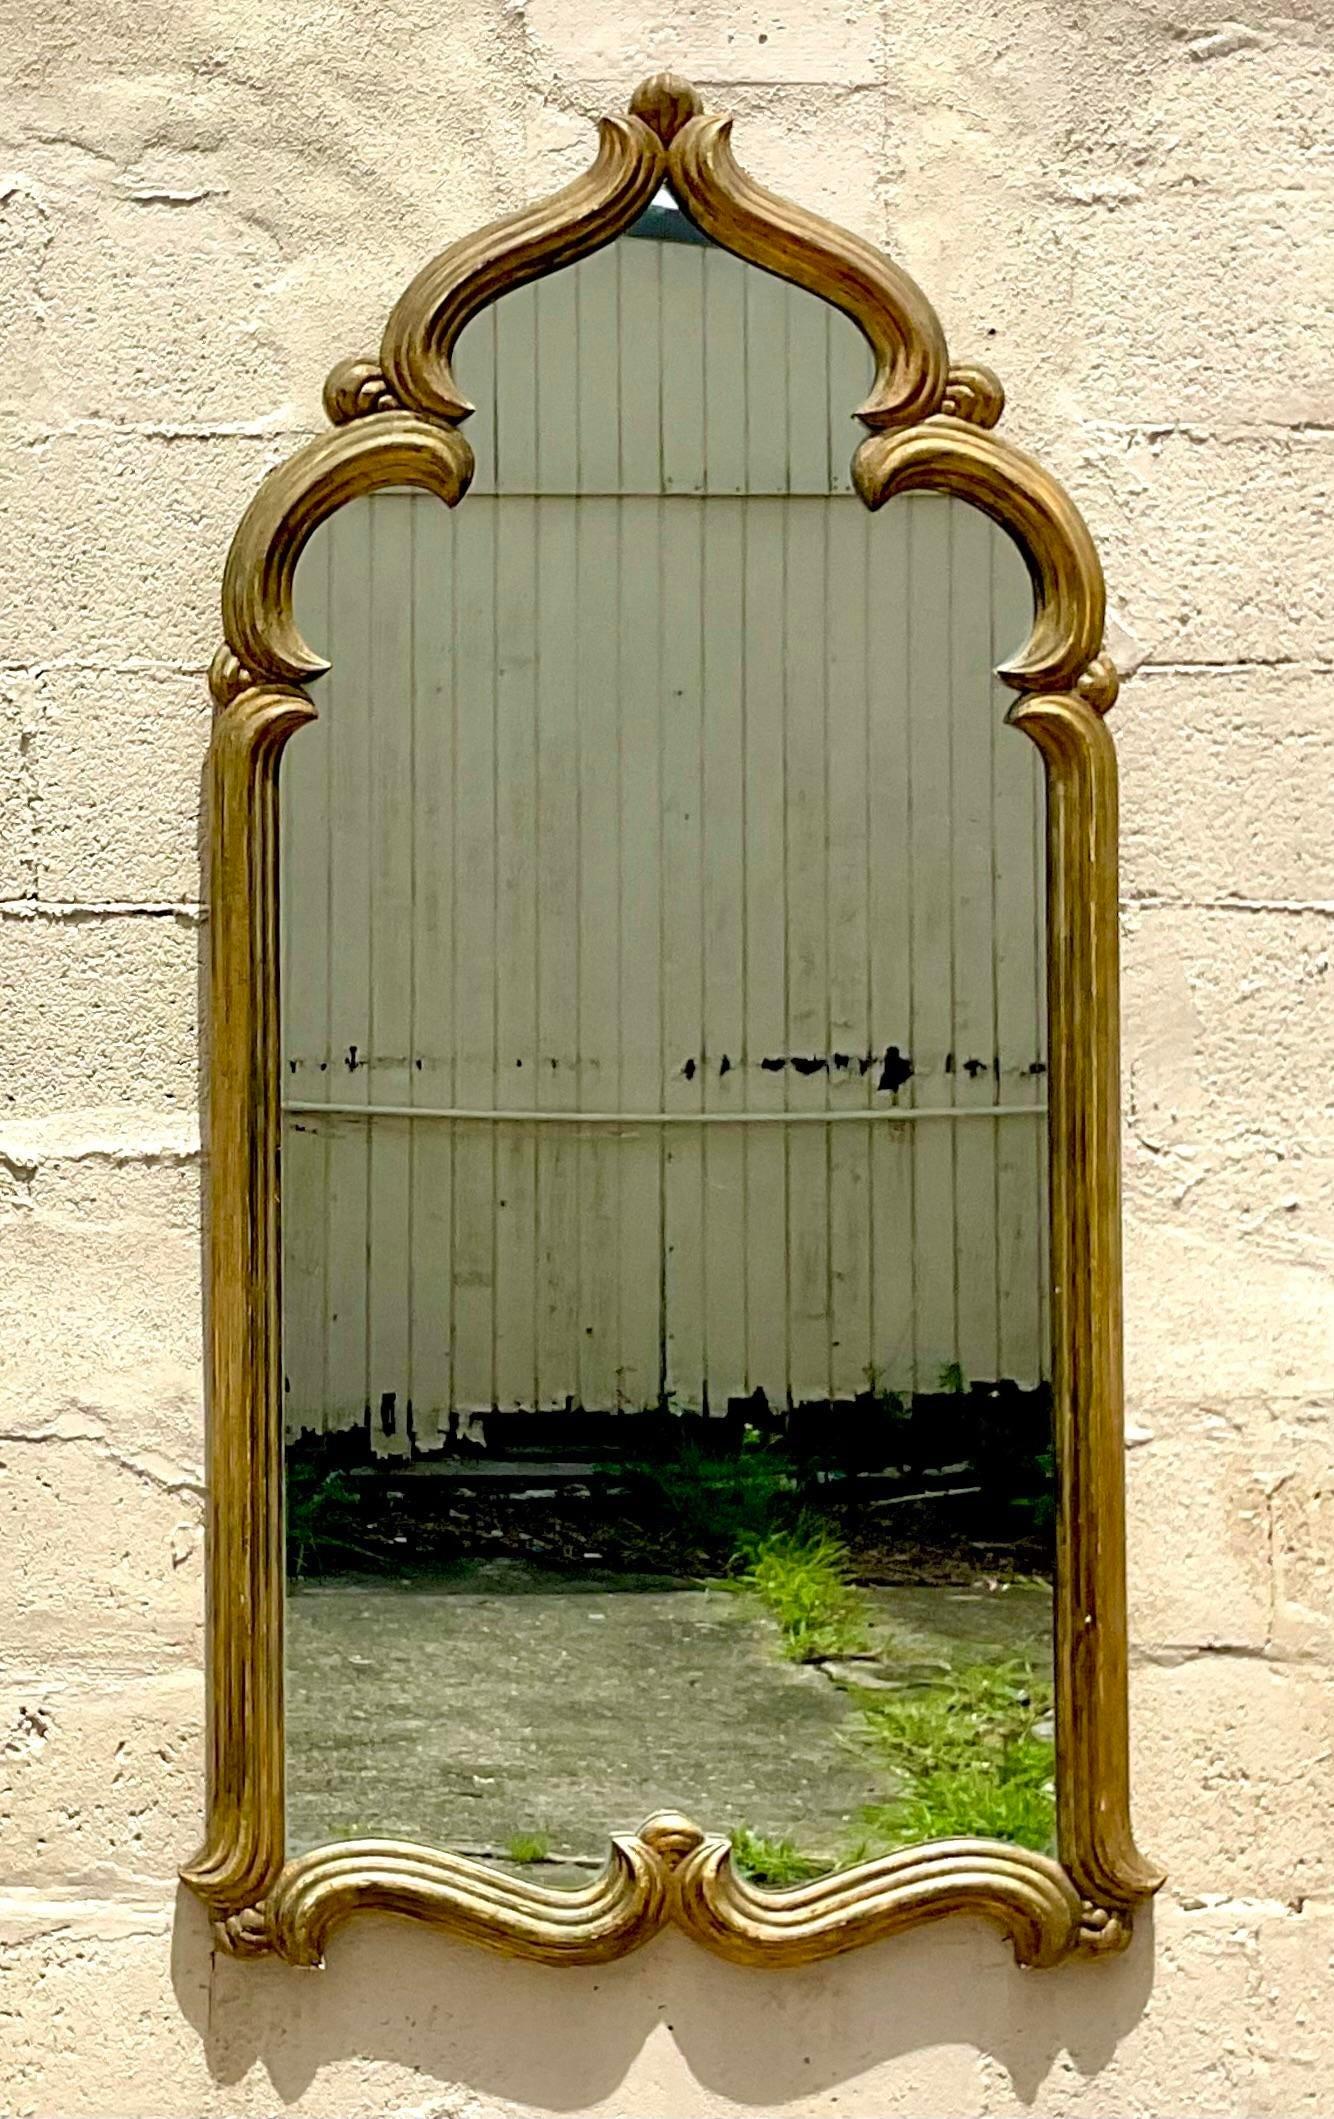 A fabulous vintage Boho wall mirror. A chic Moroccan style frame with a gilt finish. Monumental in size and drama. Acquired from a Palm Beach estate.